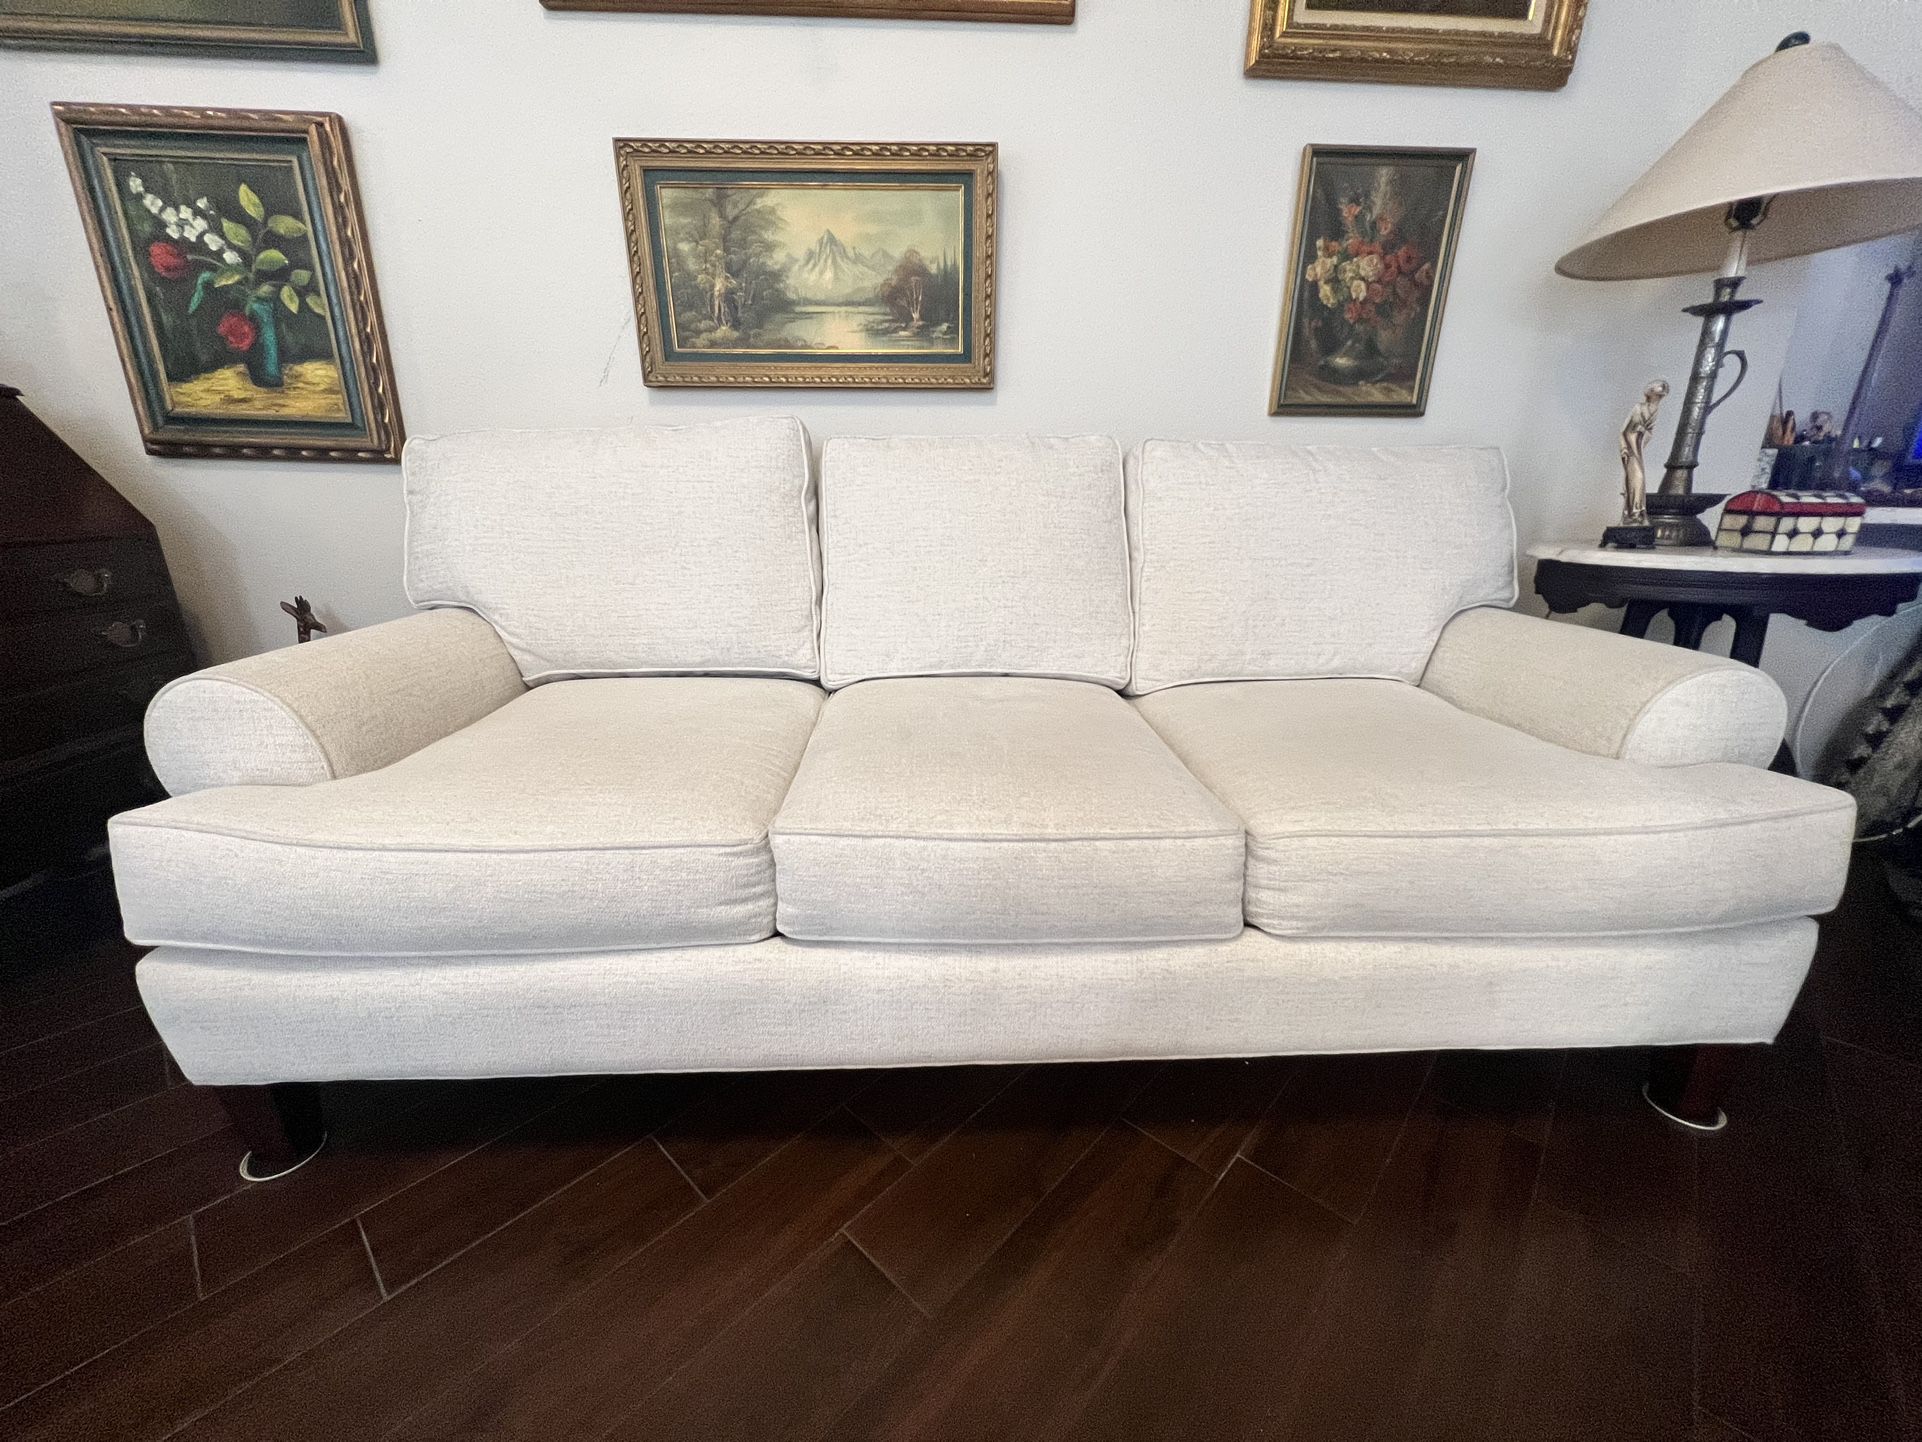 Beige Sofa  With Pillows